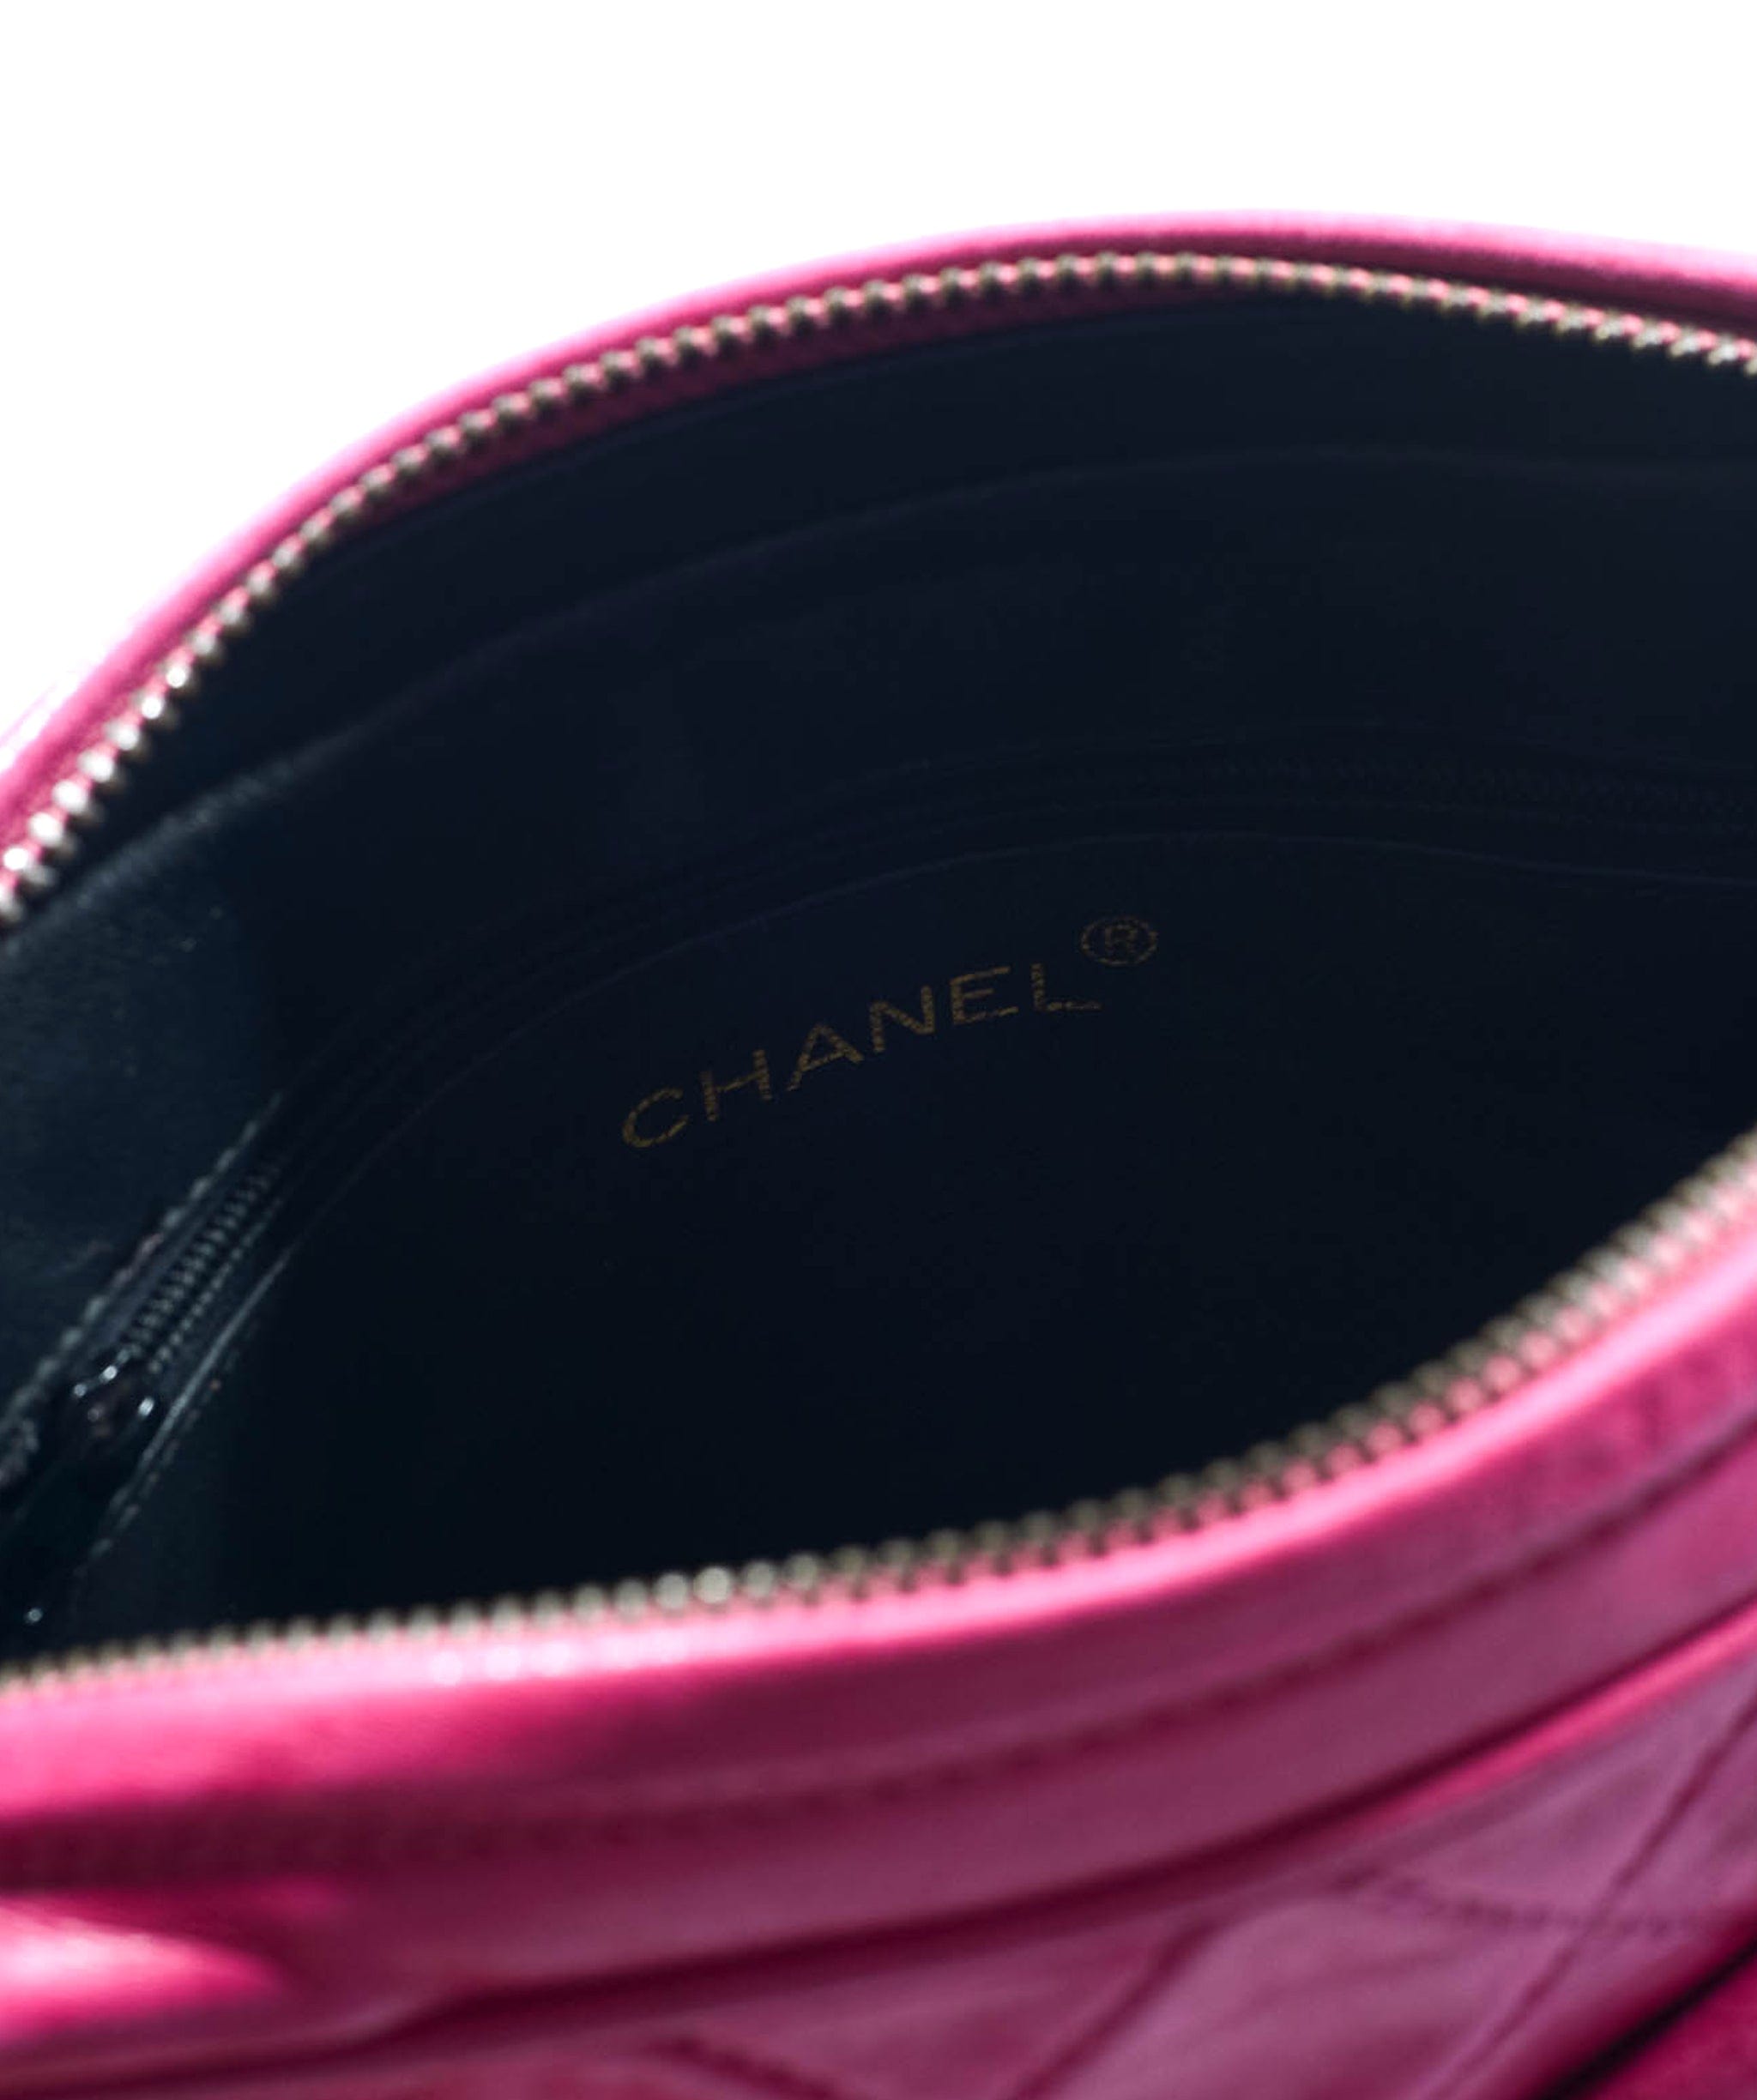 Chanel Chanel Vintage Pink Camera Leather Bag - AWC1744